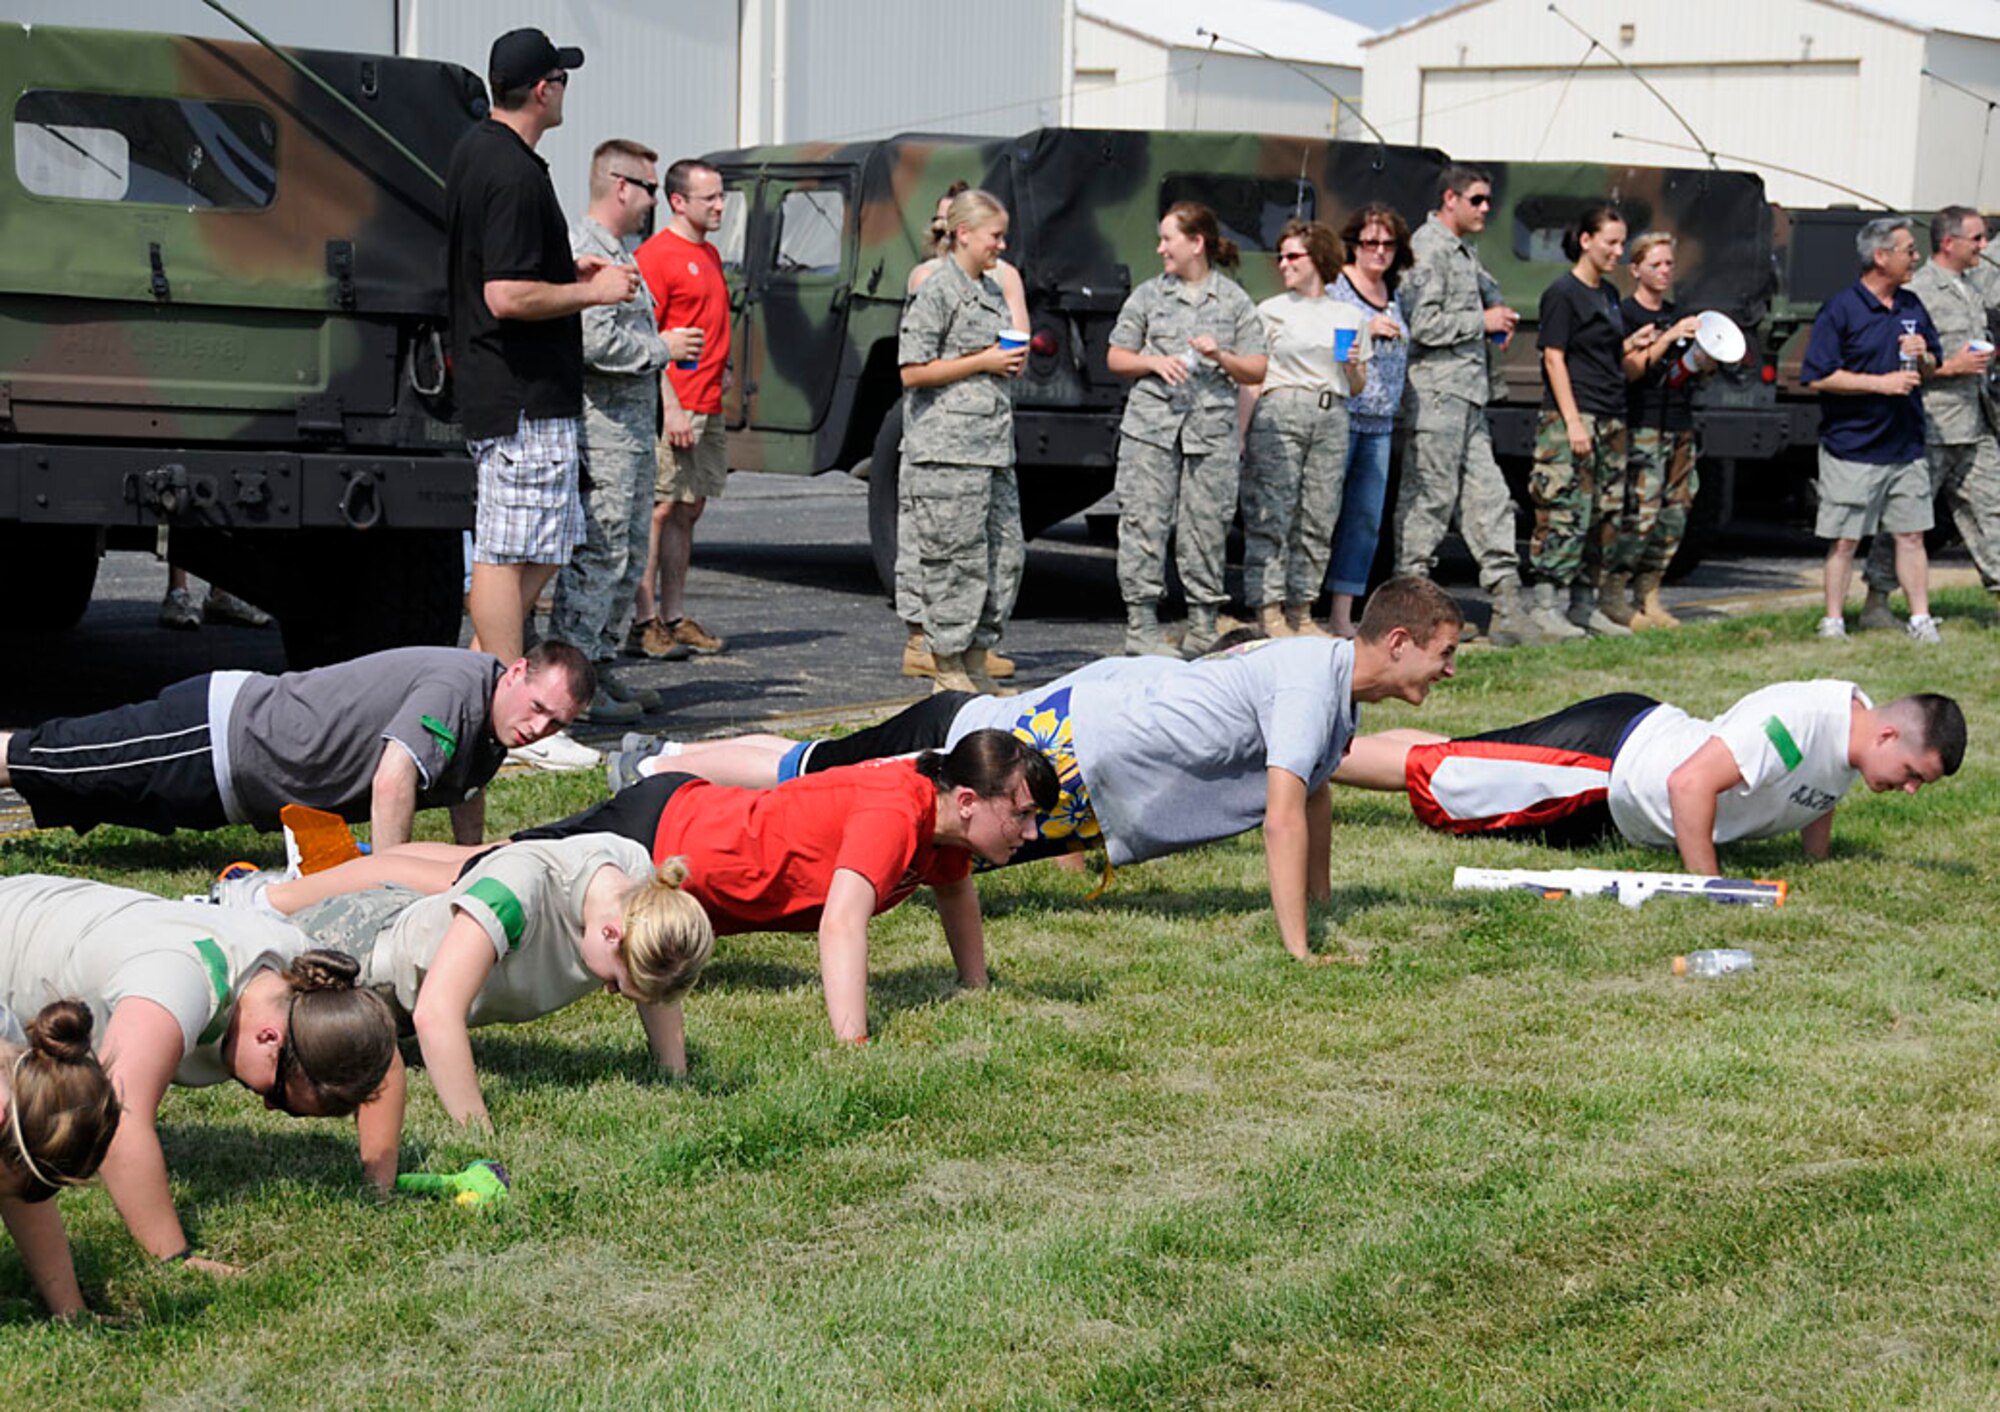 Master Sgt. Andy Vanness, a volunteer referee, forced all but the last team standing do 15 push-ups. One of the perks of being a ref. Photo by Master Sgt. John M.  Day/Released